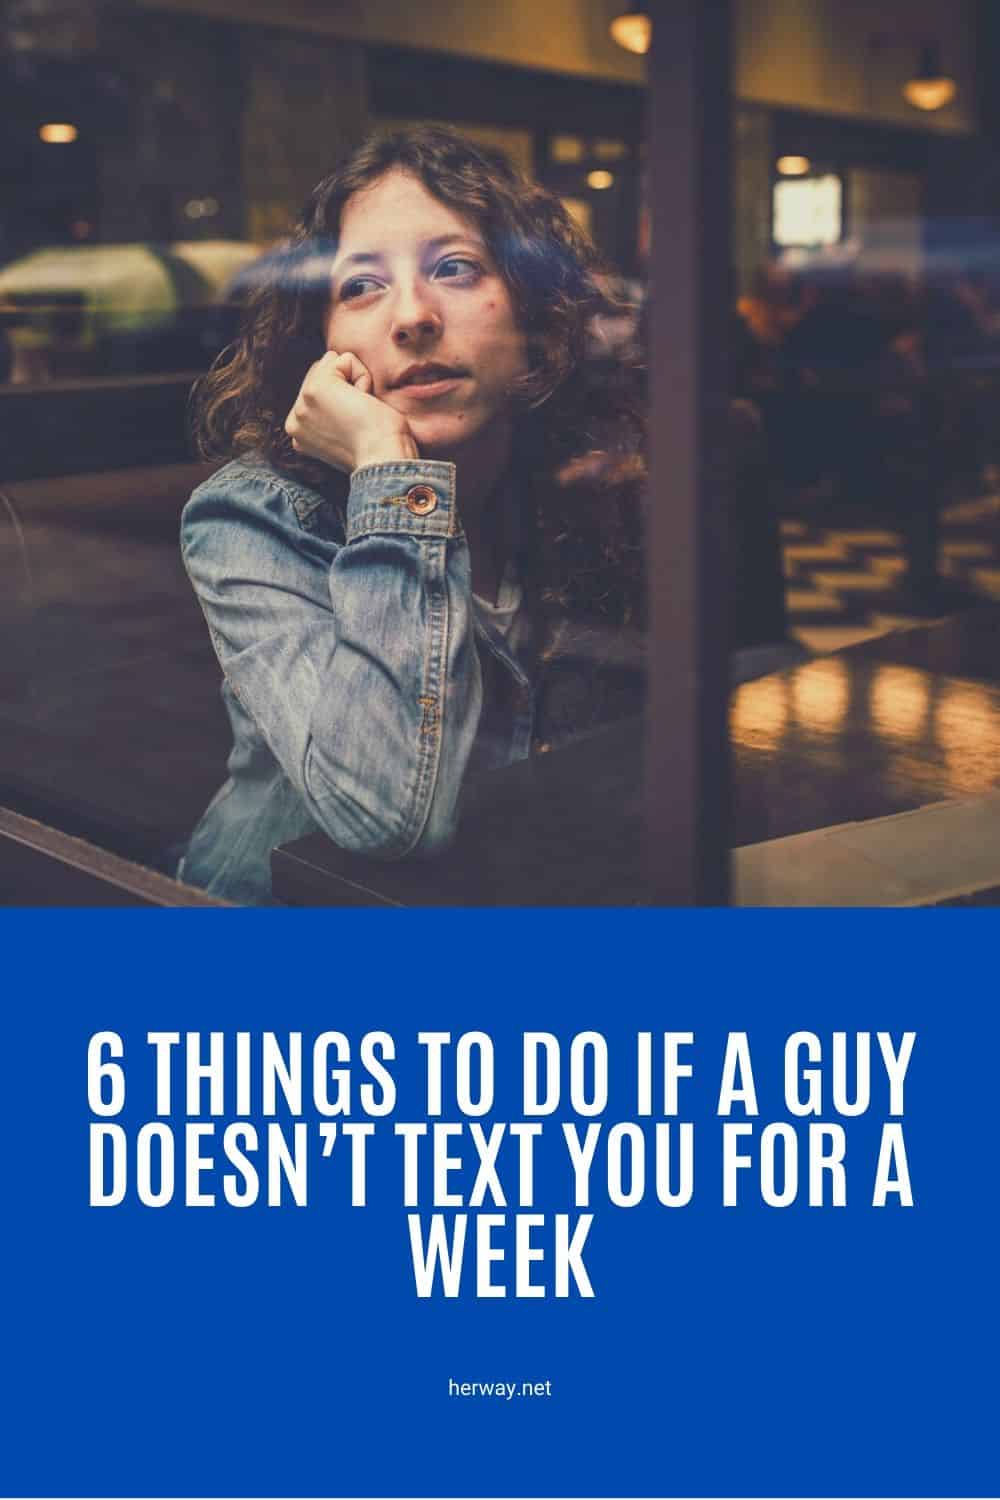 6 Things To Do If A Guy Doesn’t Text You For A Week